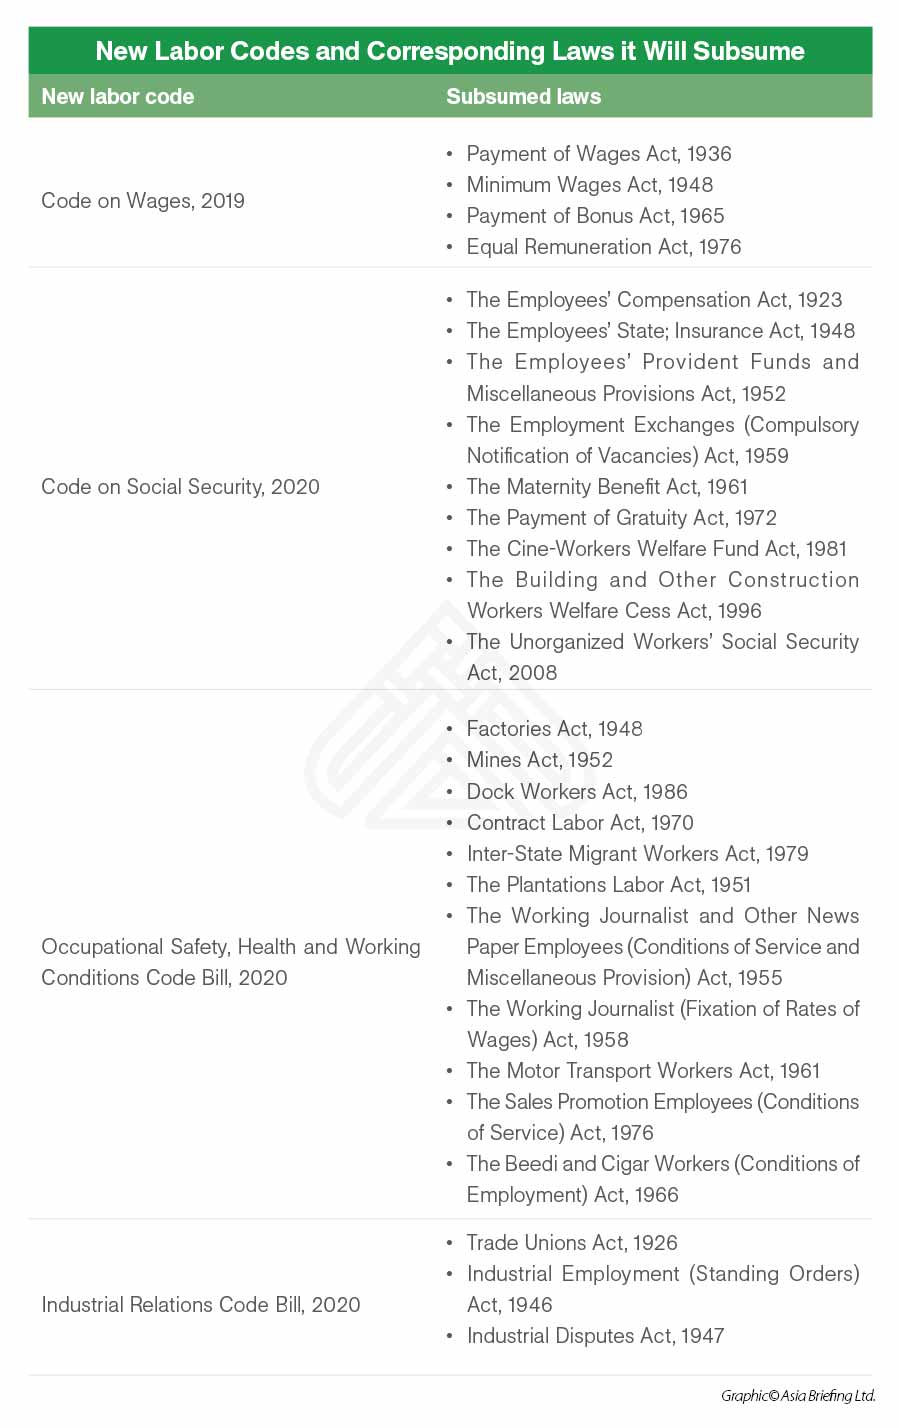 New Labor Codes and Corresponding Laws it Will Subsume